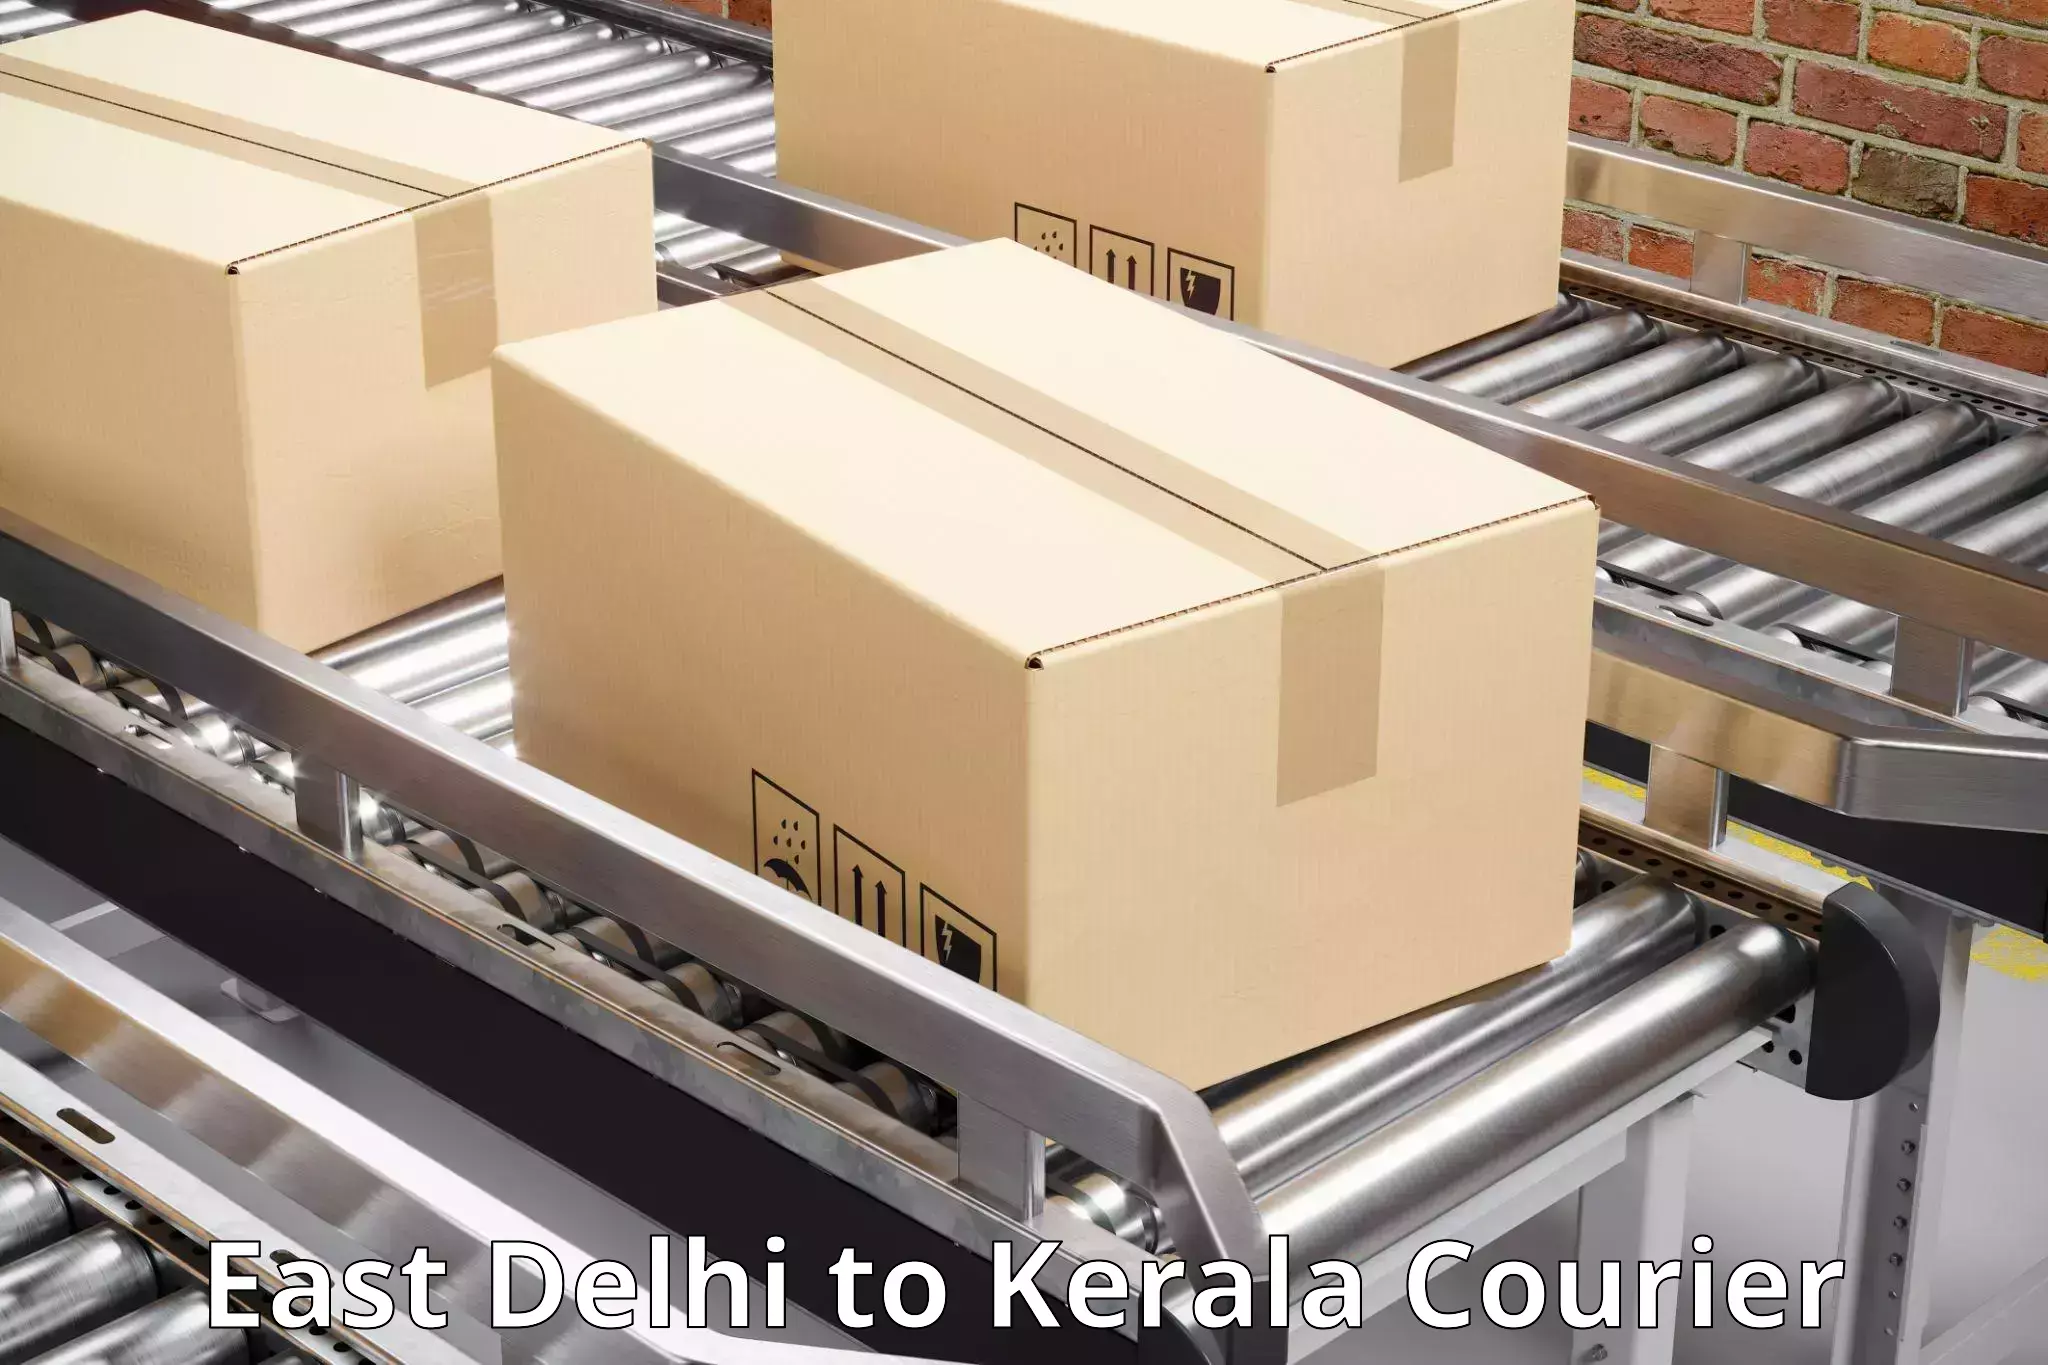 State-of-the-art courier technology East Delhi to Kollam